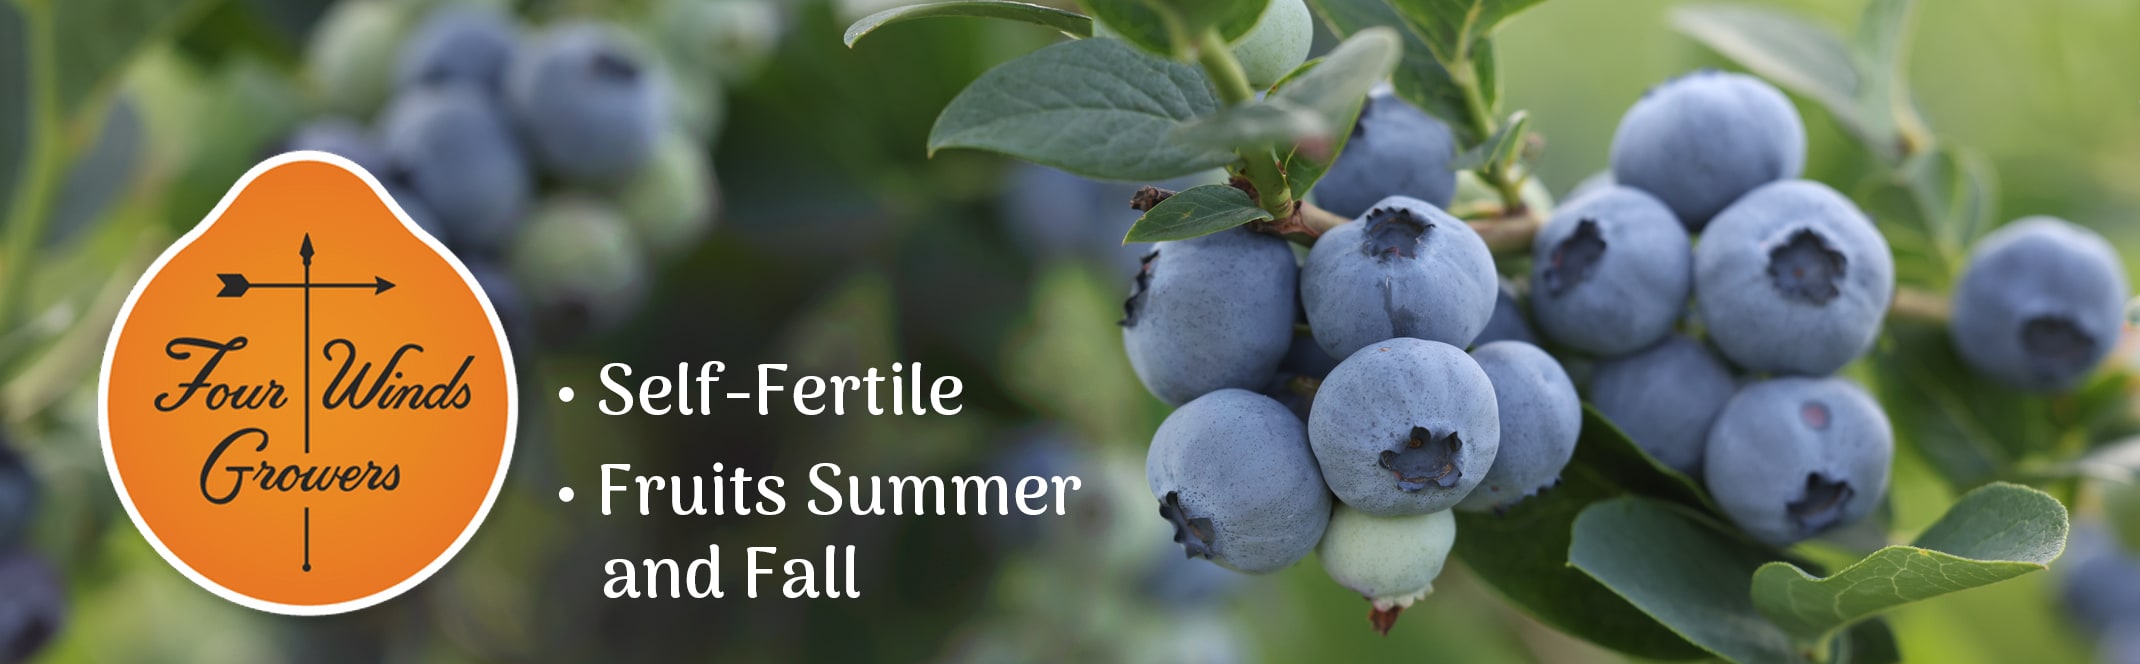 blueberries with 4 winds growers logo and self-fertile and fruites summer and fall bullets listed